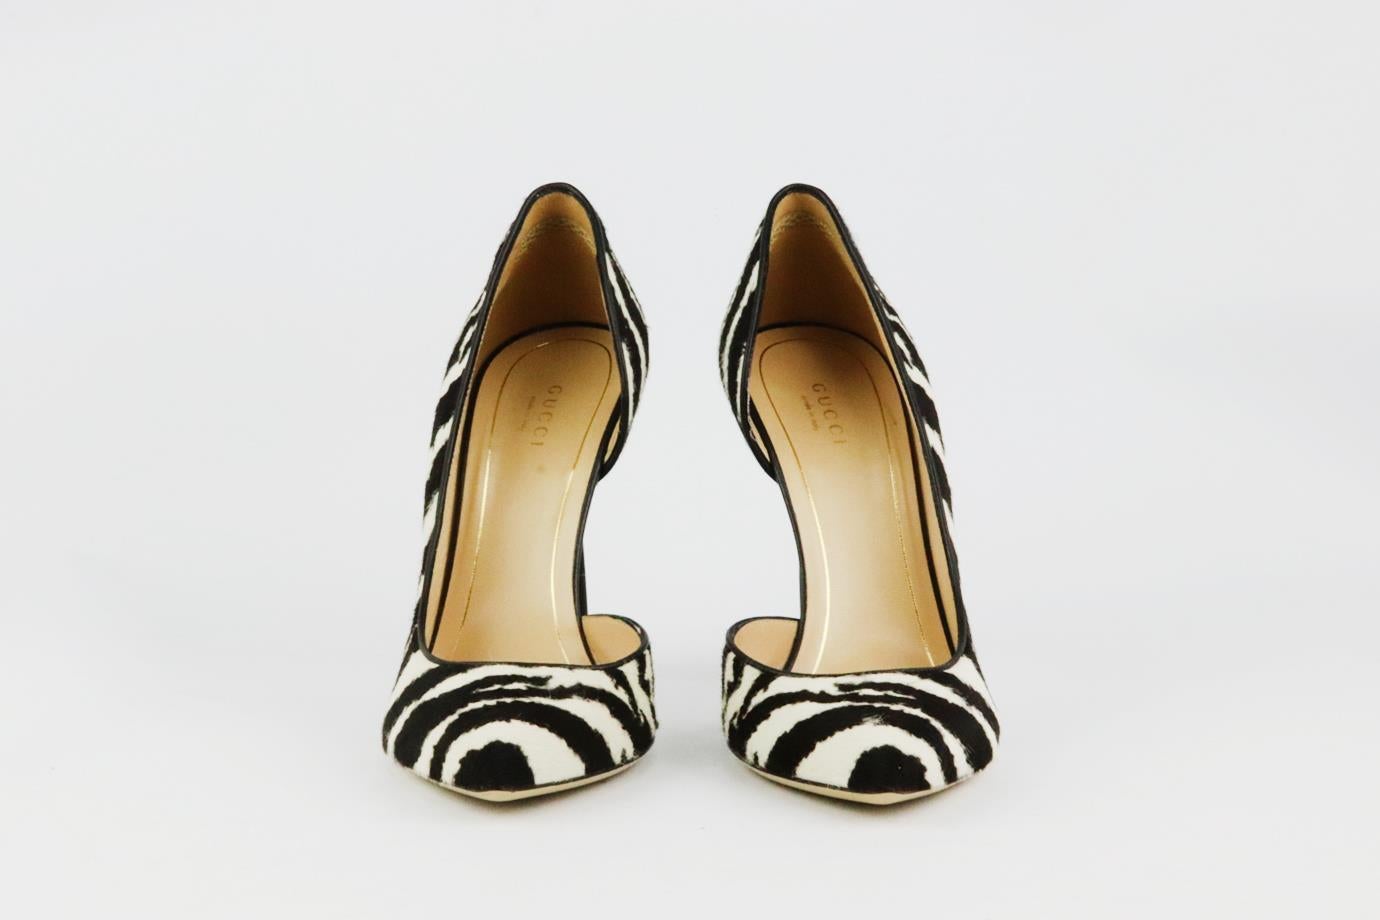 These  pumps by Gucci are a classic style that will never date, made in Italy from white and black zebra print calf-hair, they have sharp pointed toes and comfortable 101 mm heels with d’orsay silhouette to take you to dinner with friends. Heel